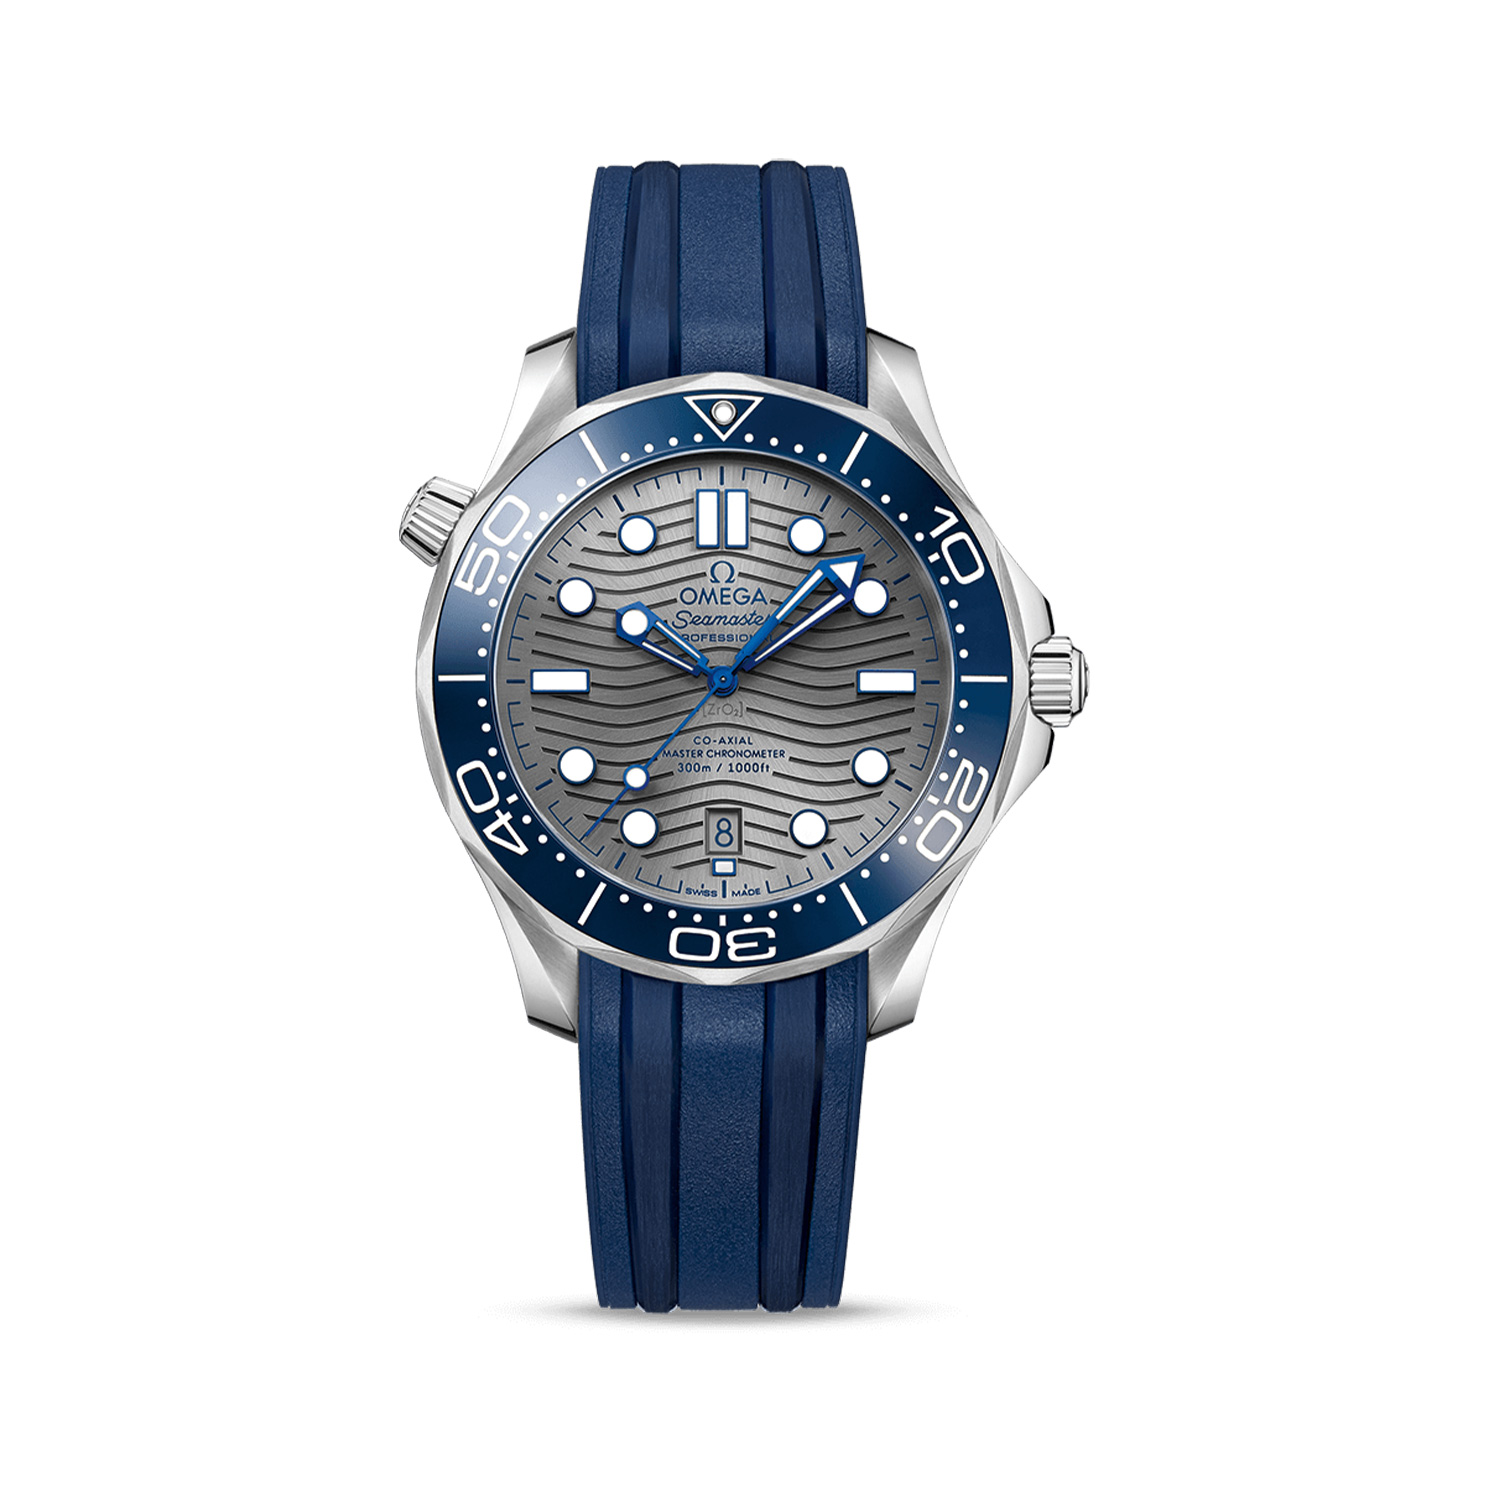 Montre diver 300m co‑axial master chronometer 42 mm - Omega